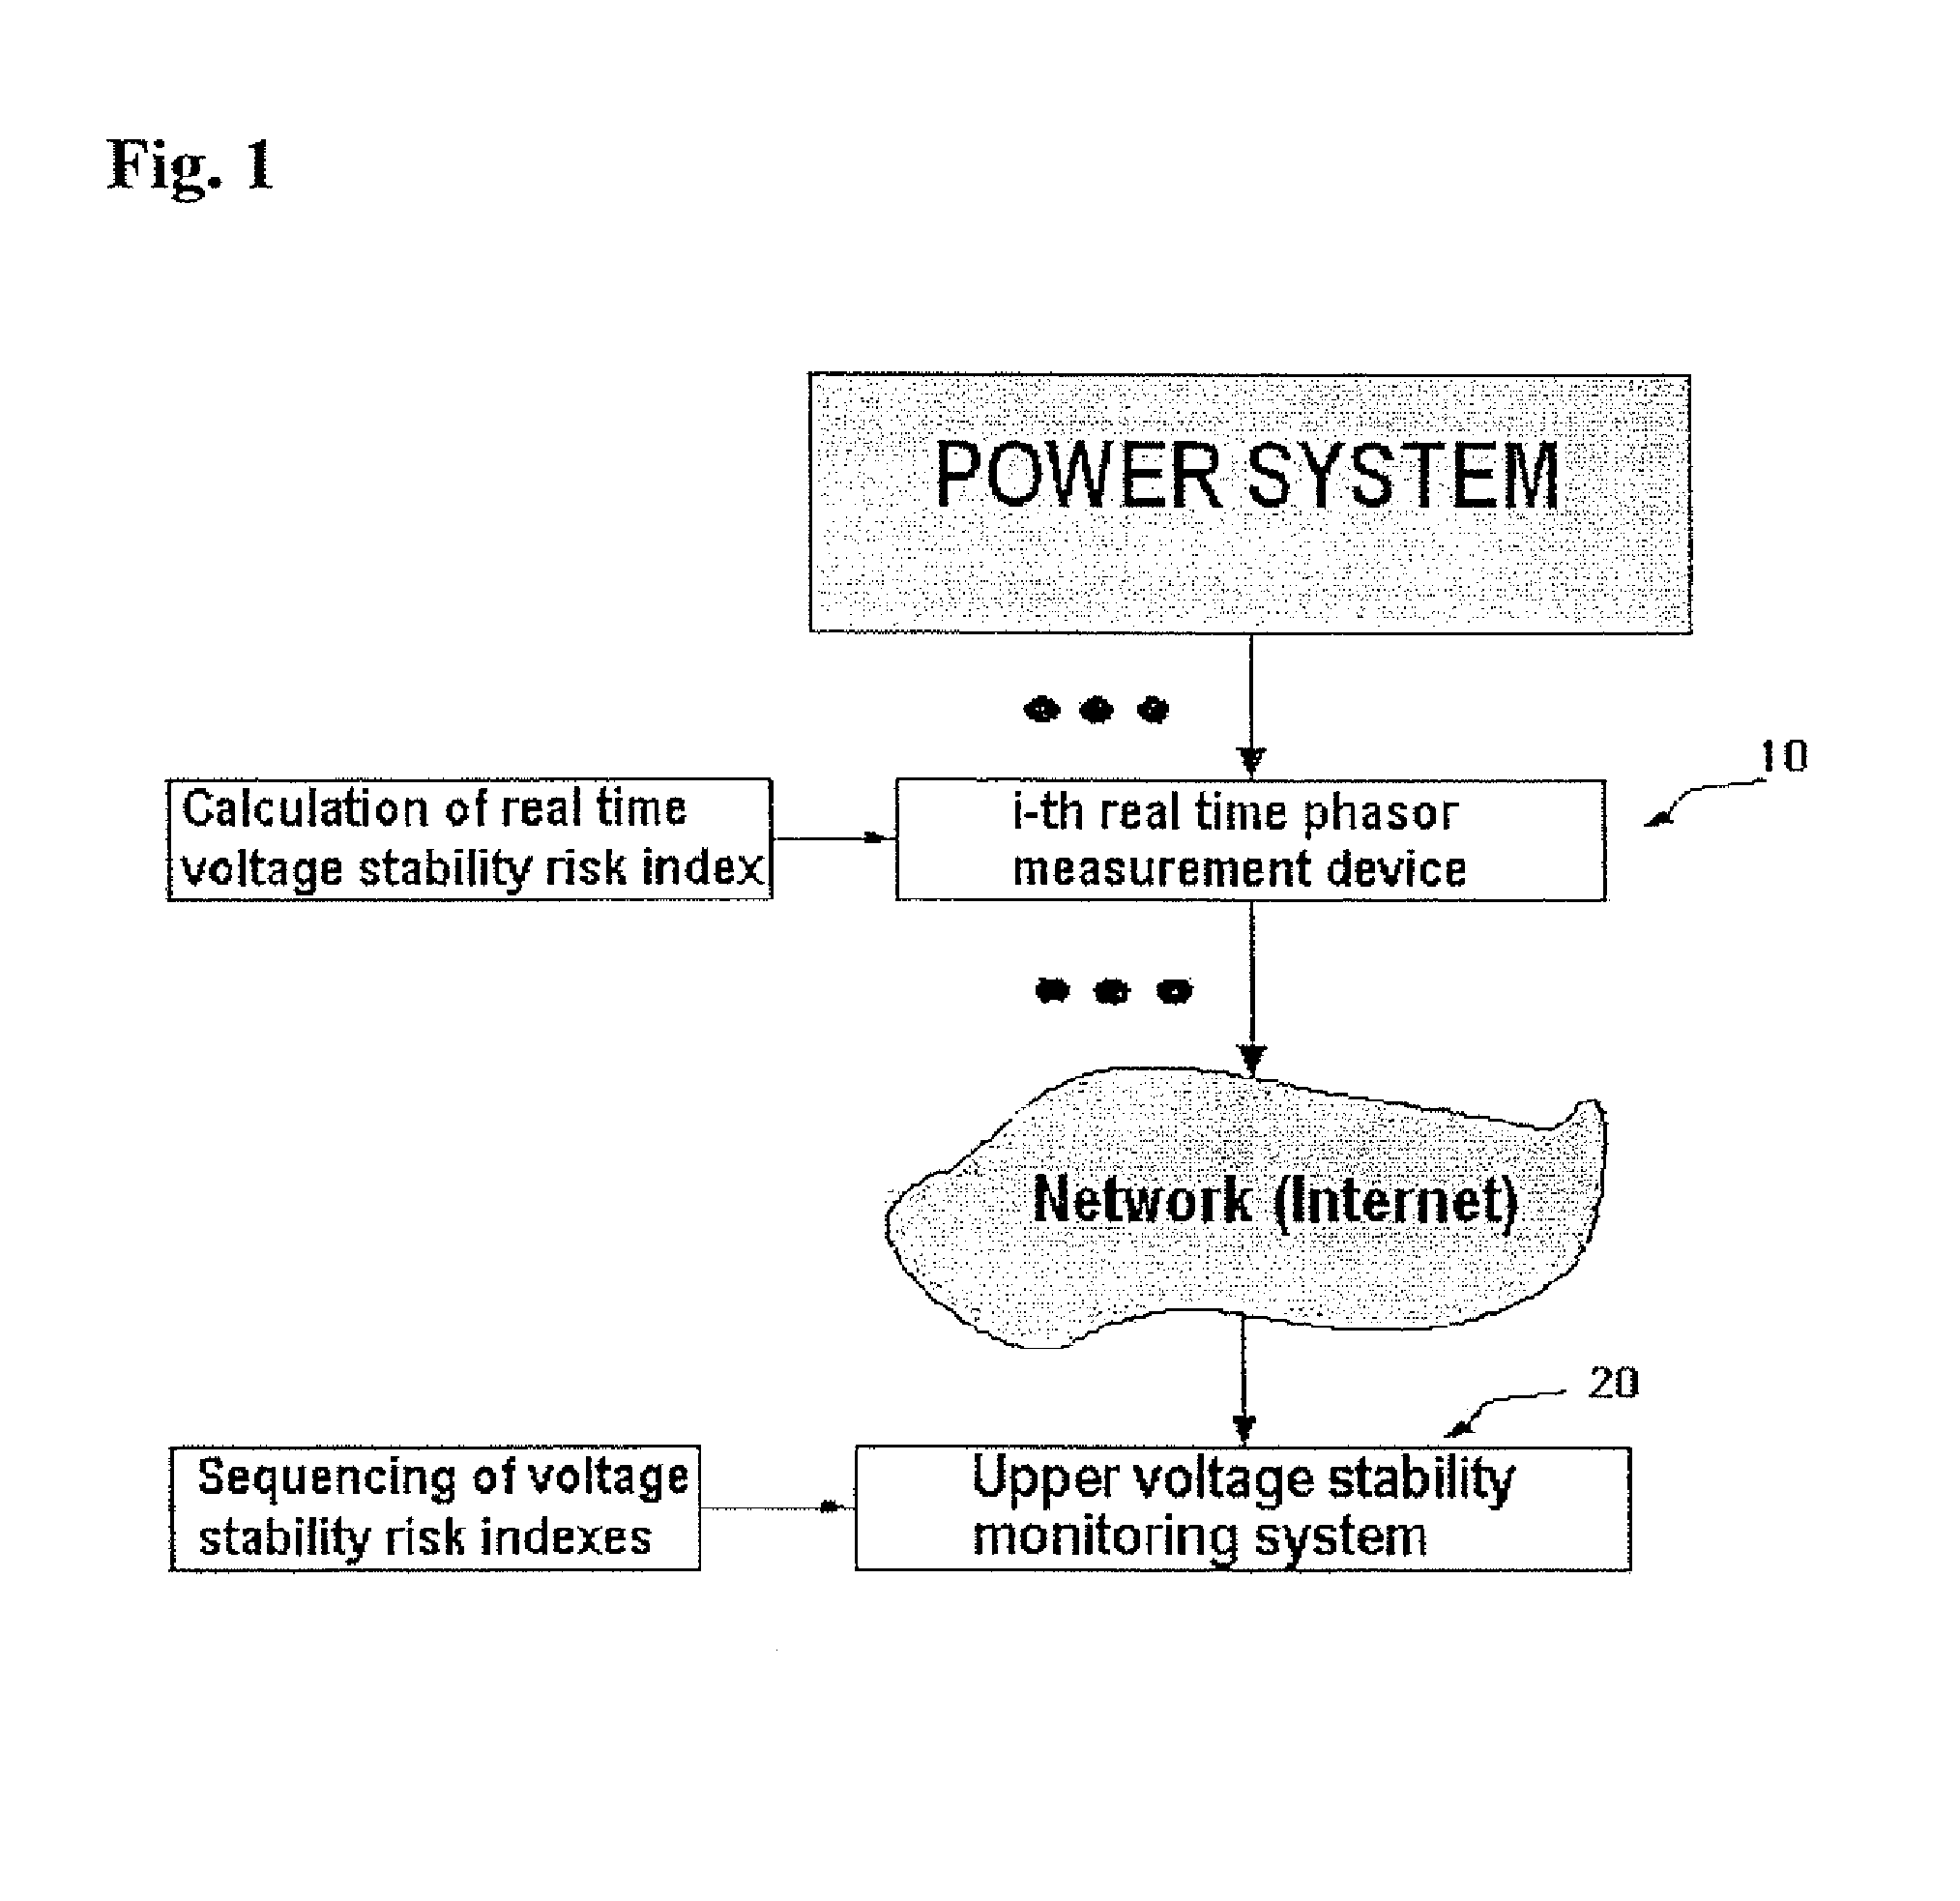 System and method for calculating real-time voltage stability risk index in power system using time series data